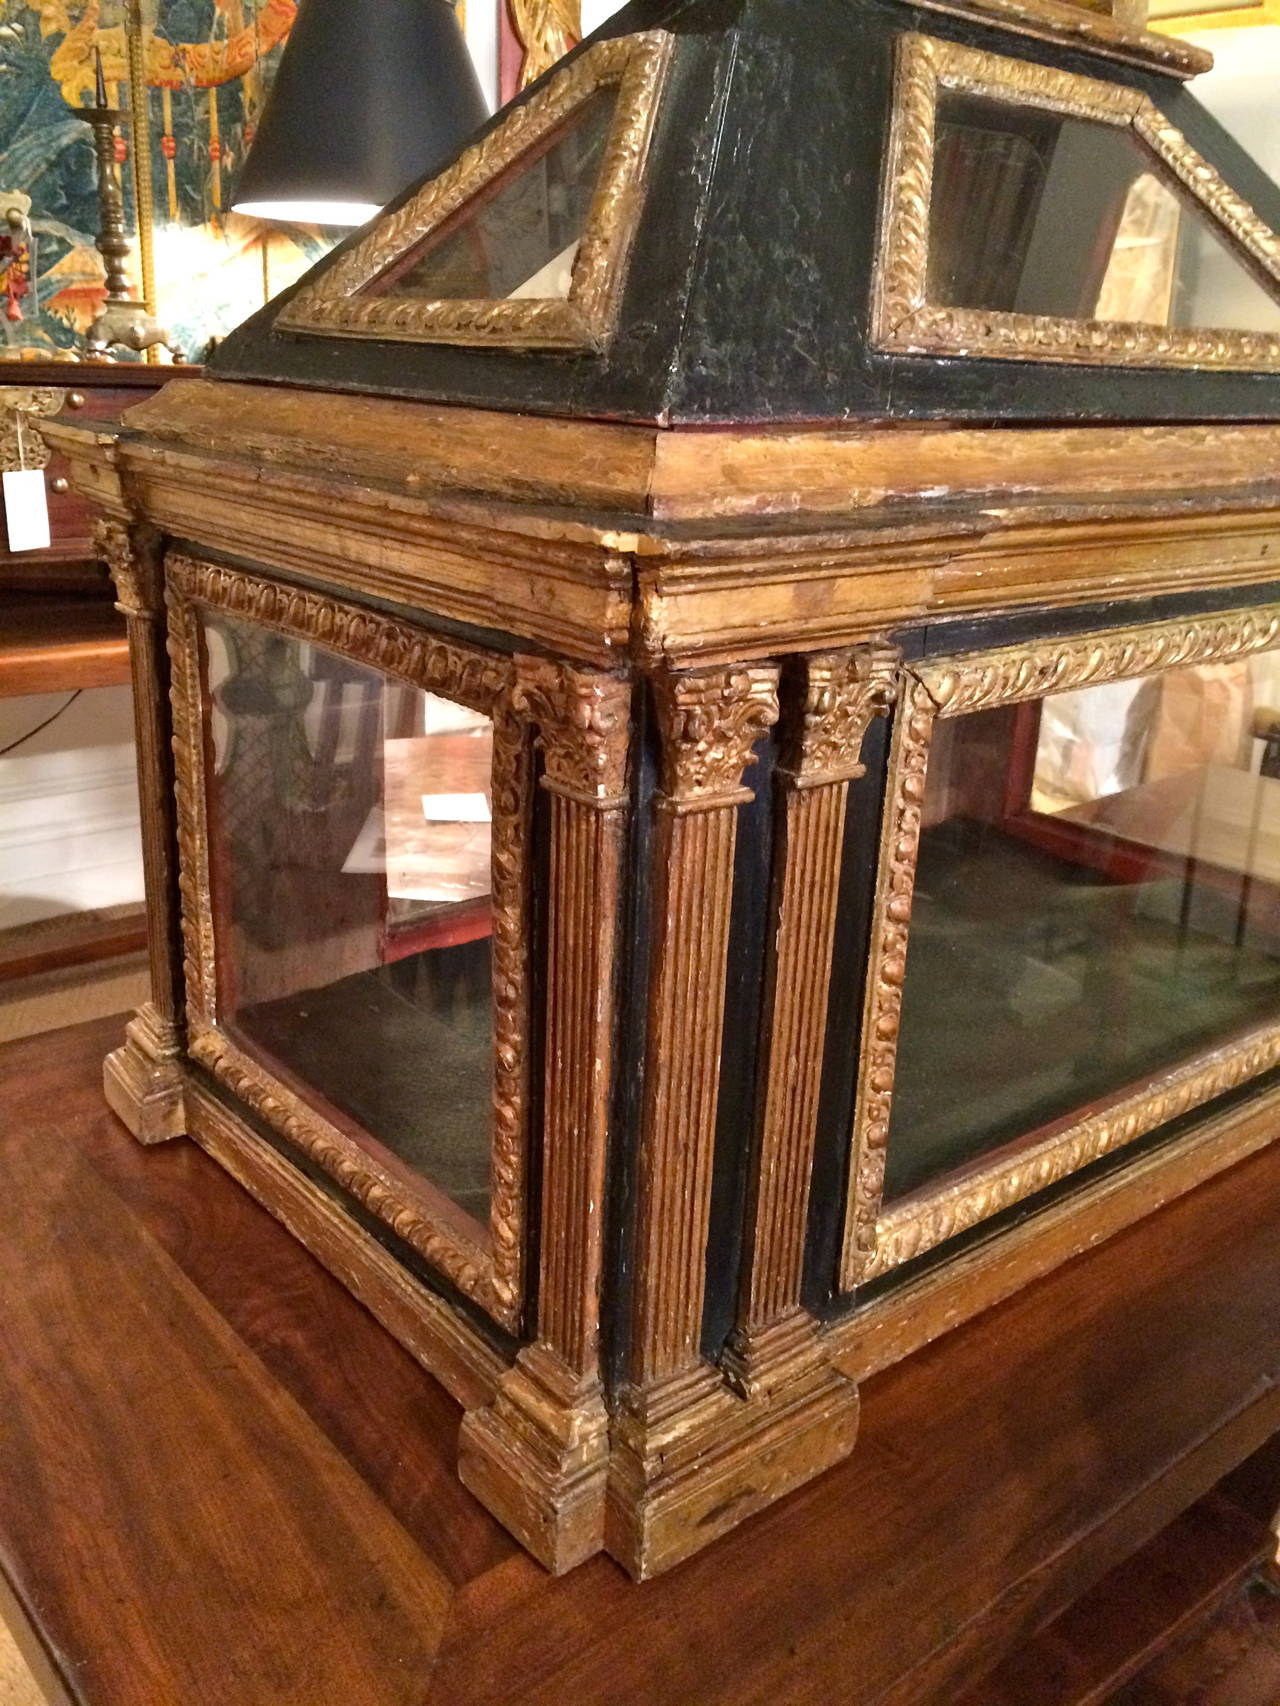 18th Century Italian Neoclassical Painted and Gilt Wood Architectural Reliquary